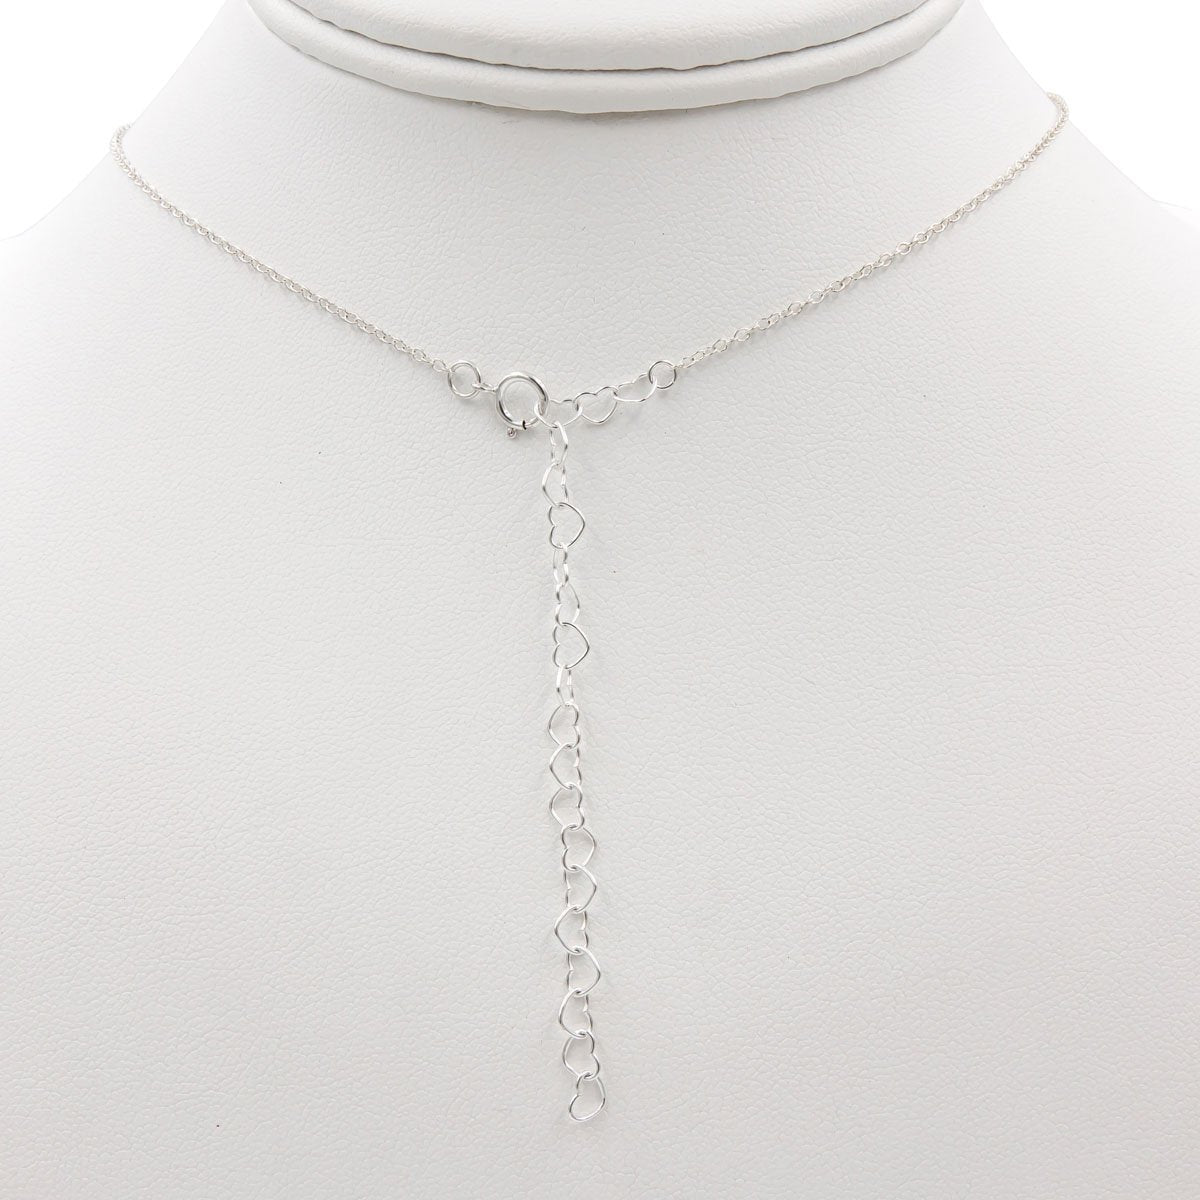 Earth Song Jewelry ~ Handmade, eco-friendly Earth Song Jewelry Sterling Silver necklaces are adjustable with a 3” heart chain!